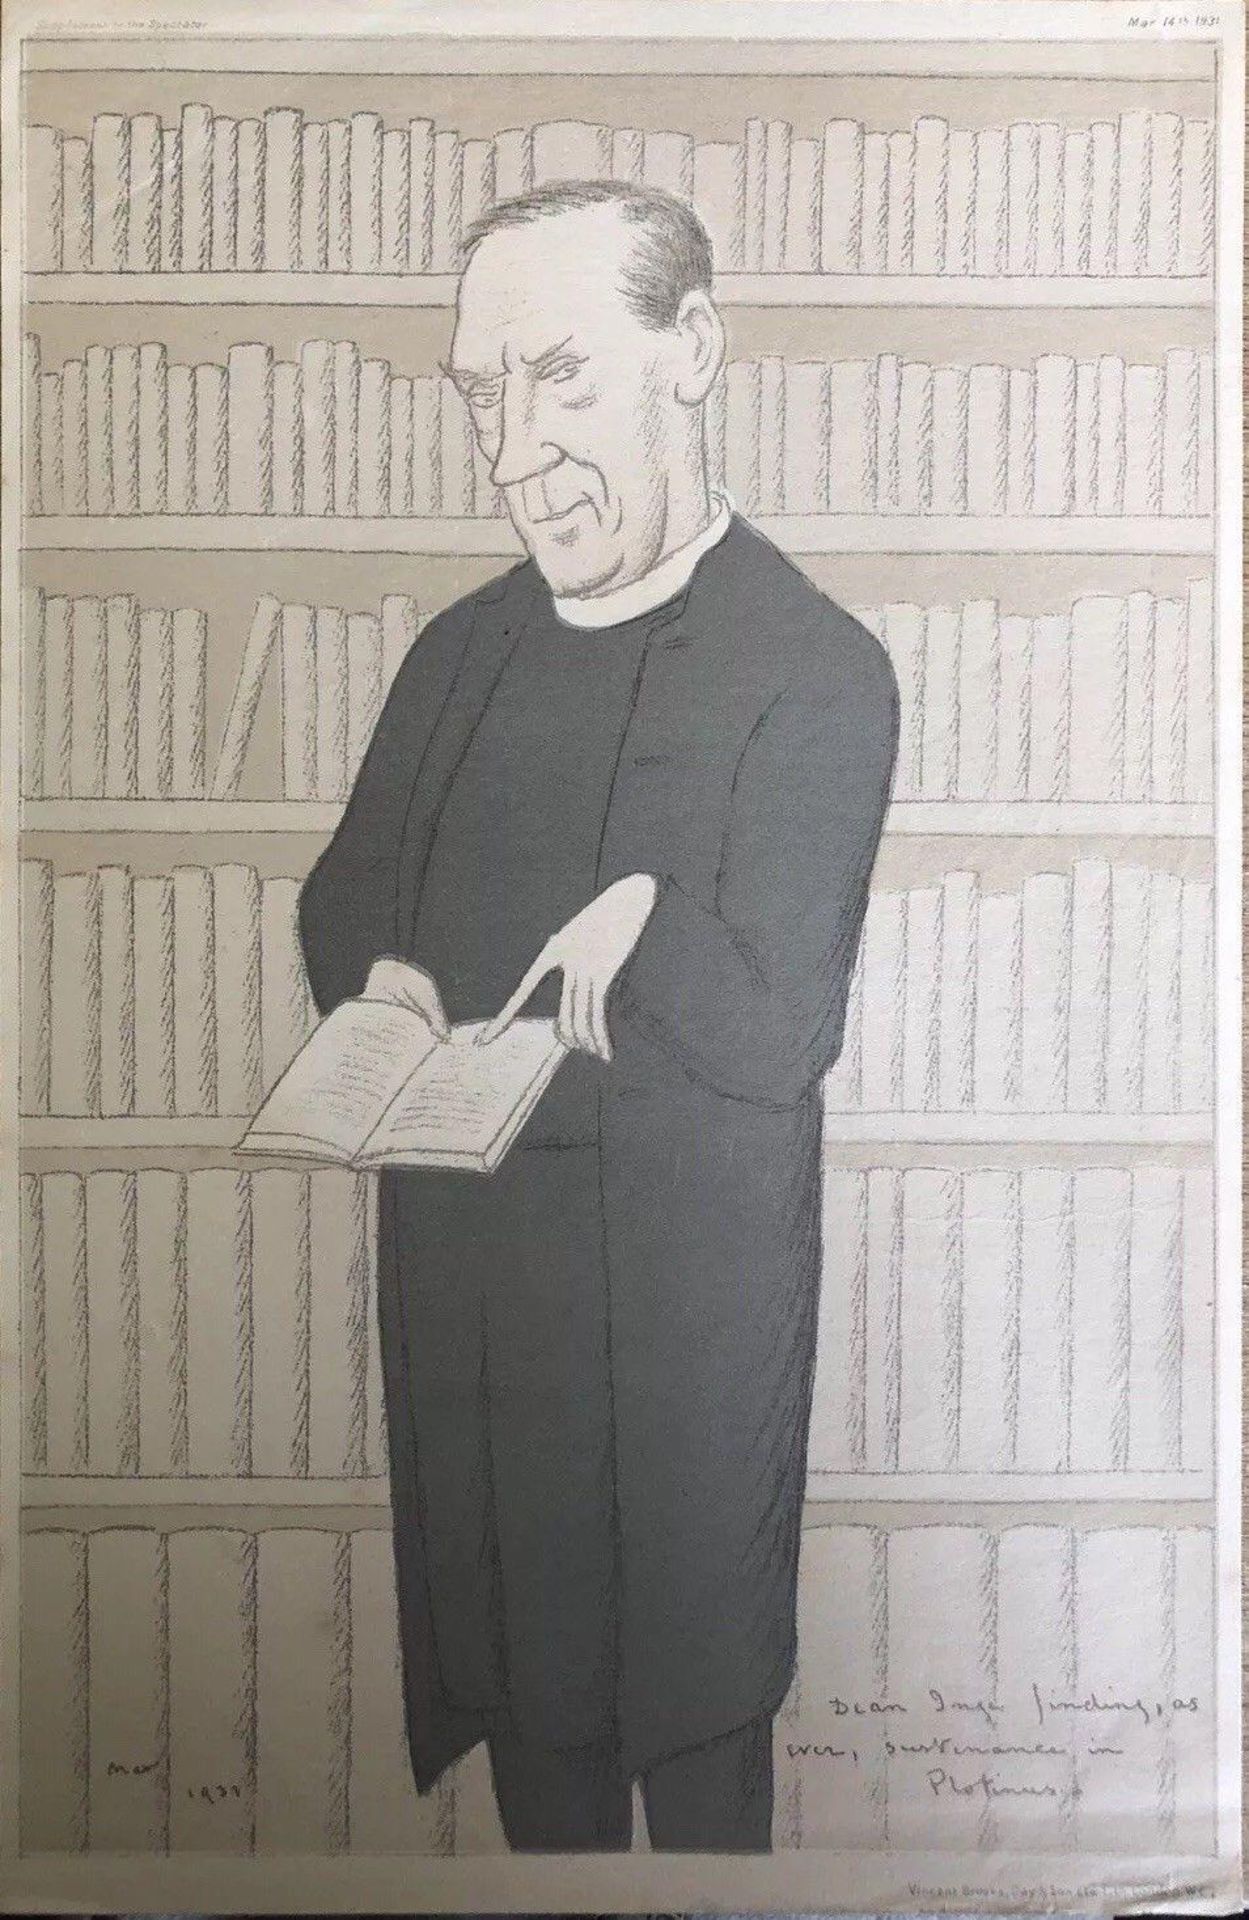 1930s Lithograph by Max Beerbohm - Caricature portrait of Reverend Dean Inge